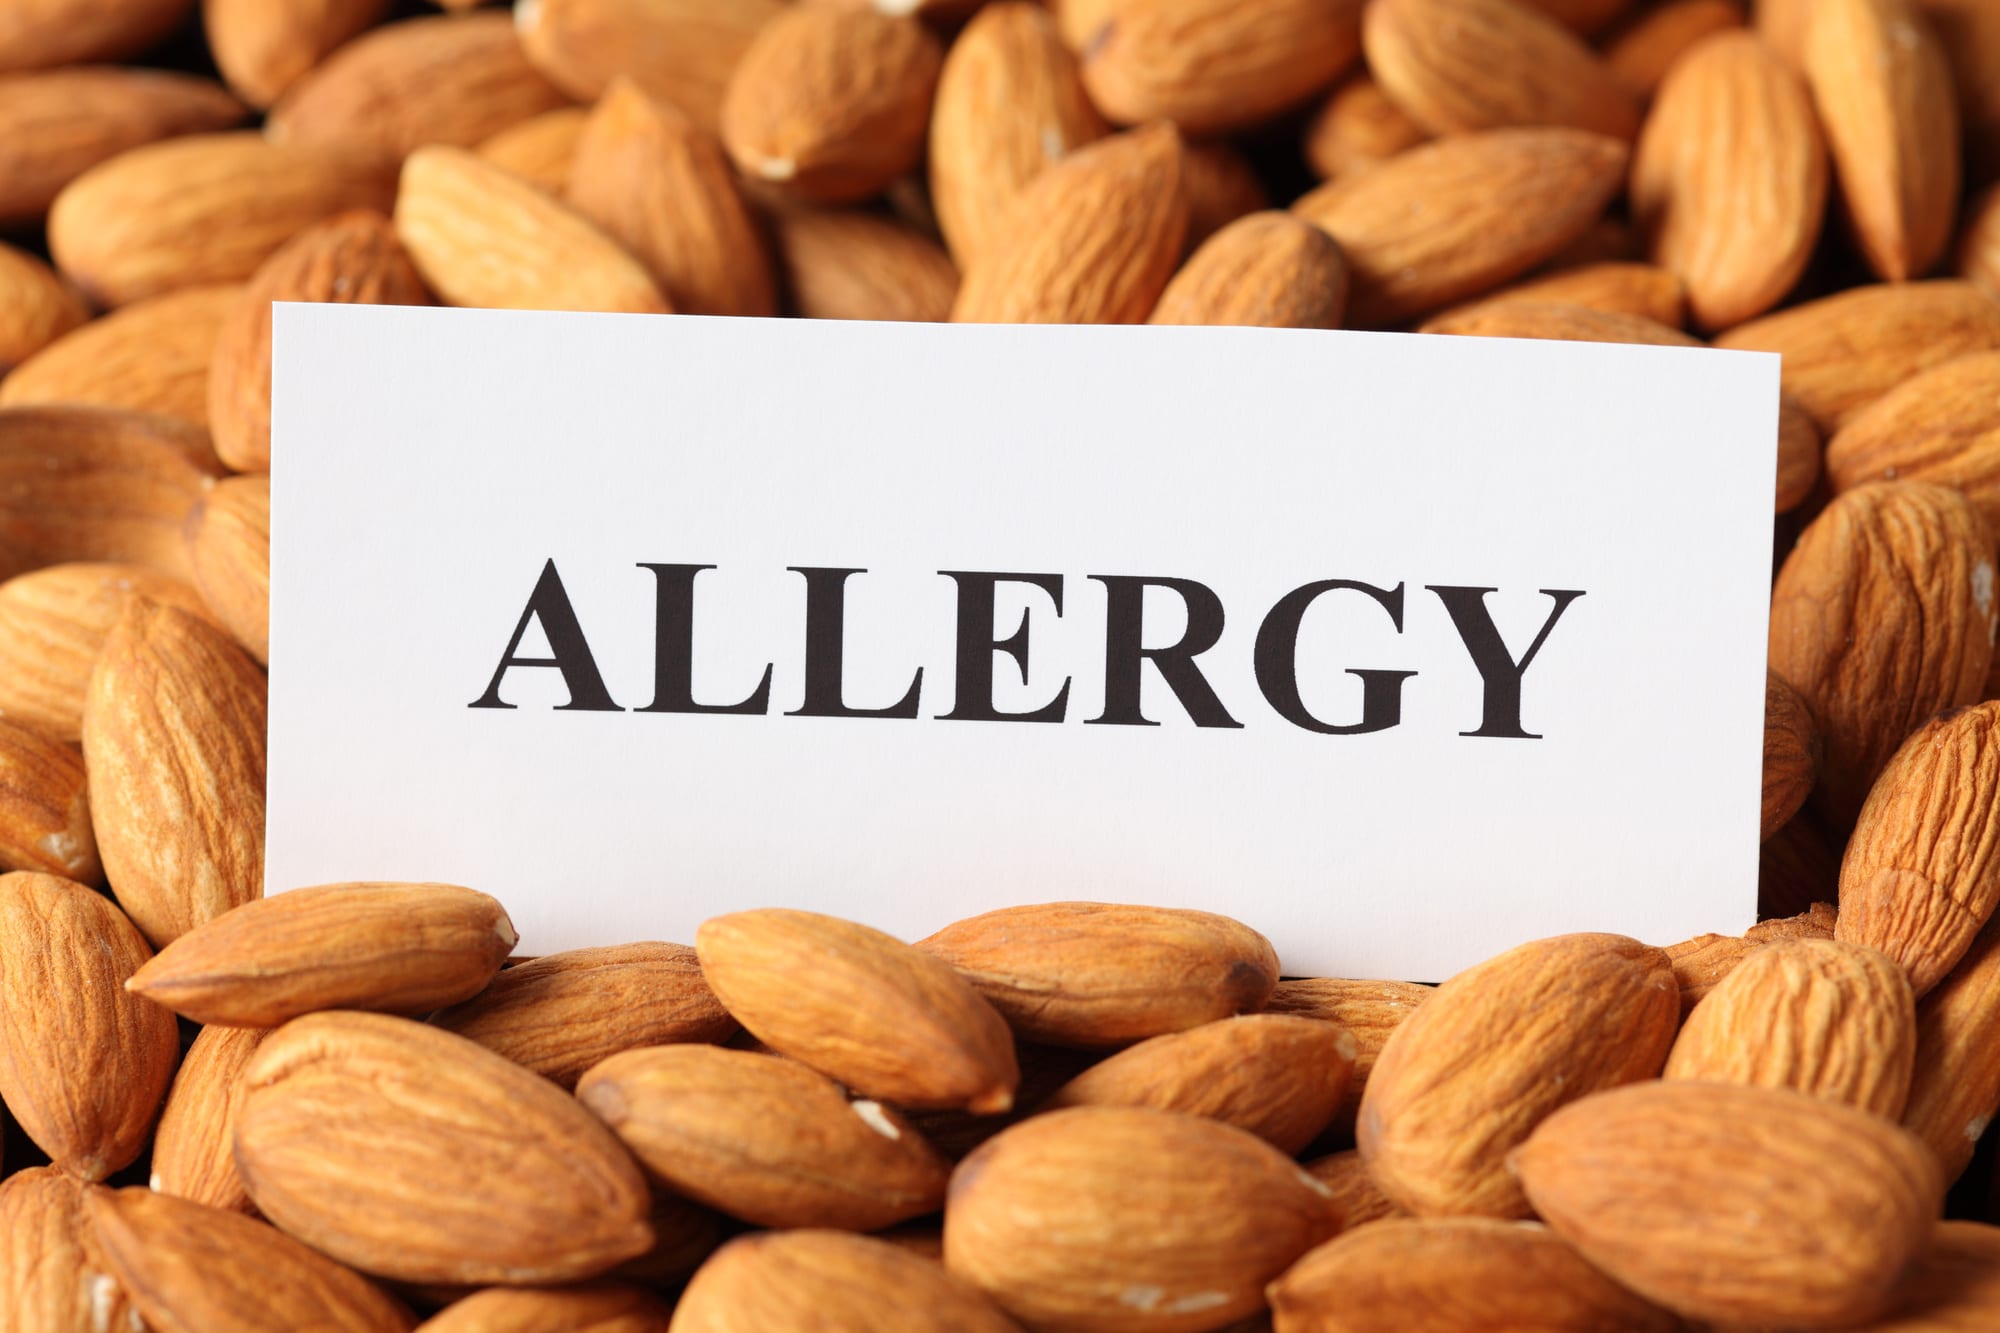 pile of almonds with sign reading "allergy"